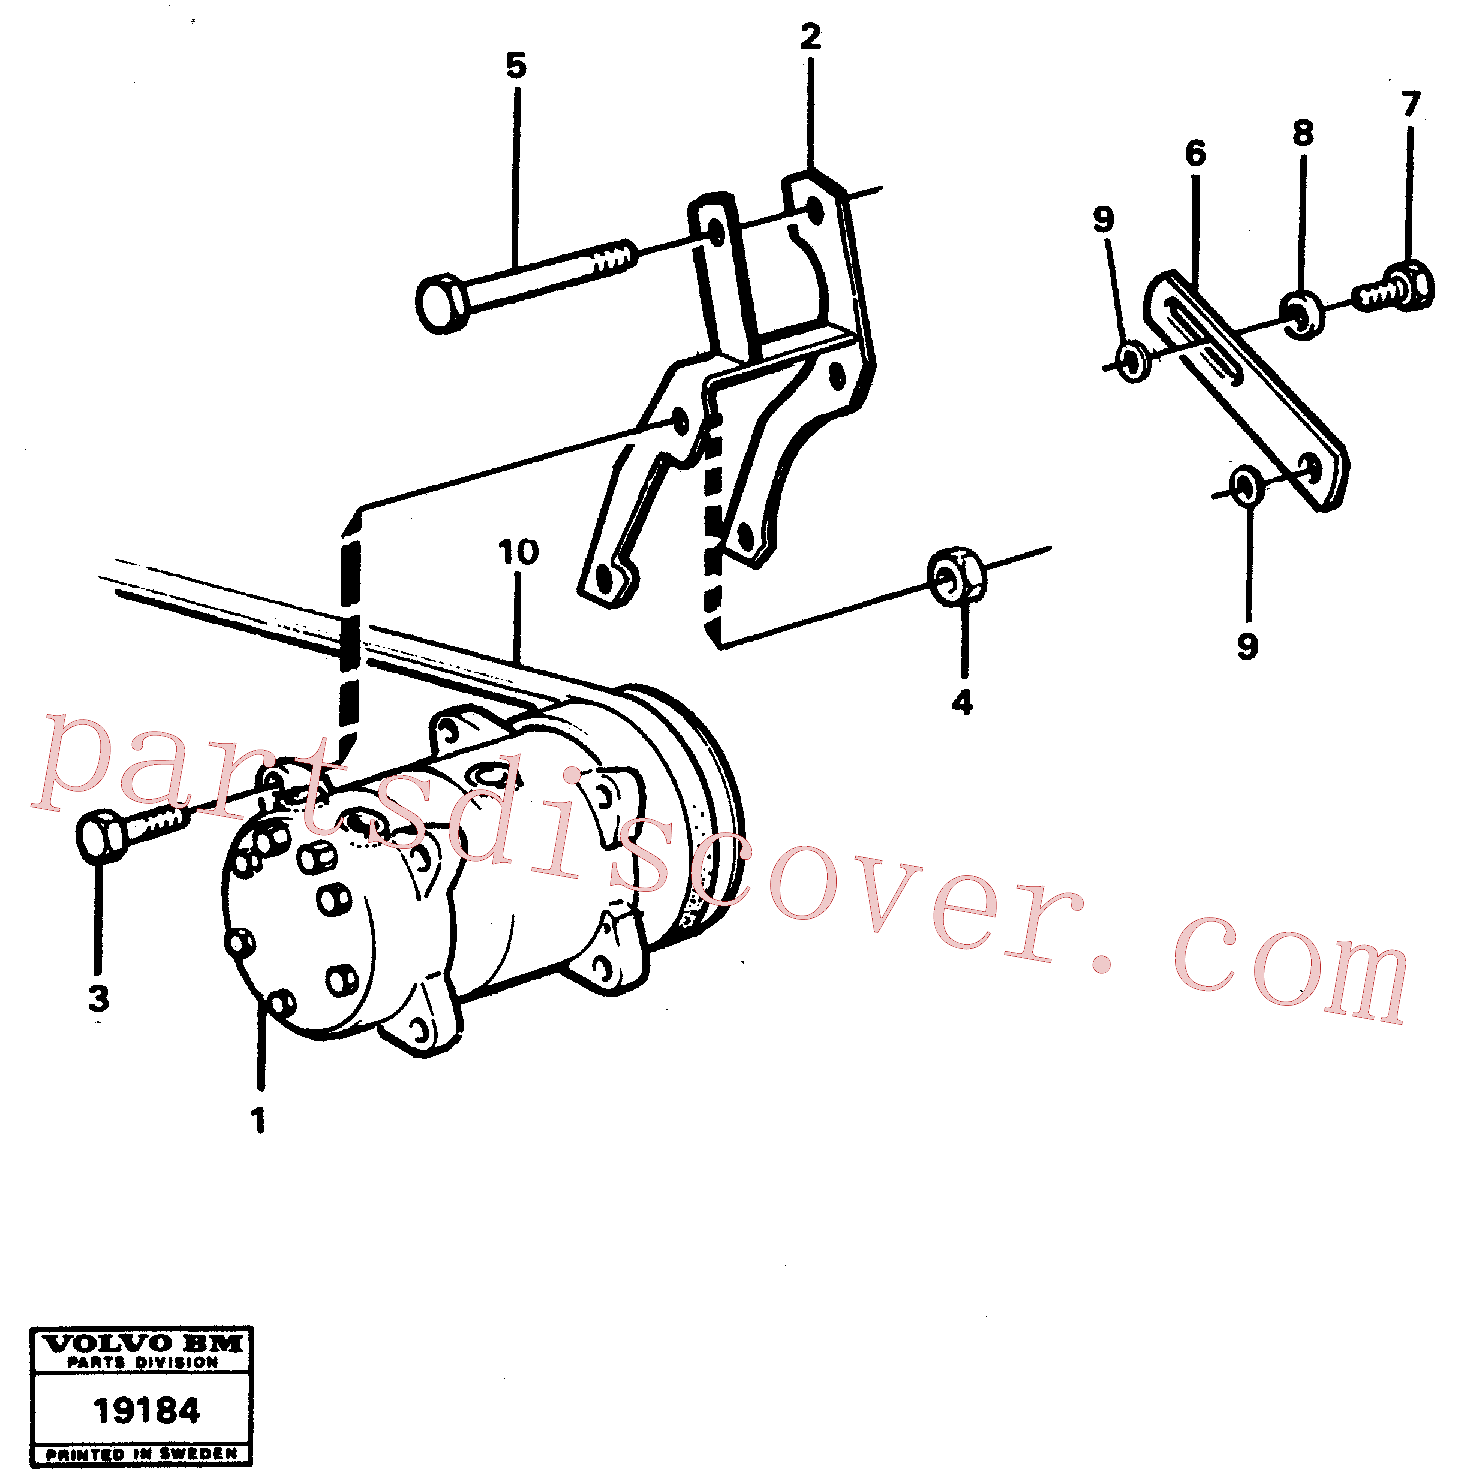 VOE955352 for Volvo Air compressor with fitting parts.(19184 assembly)